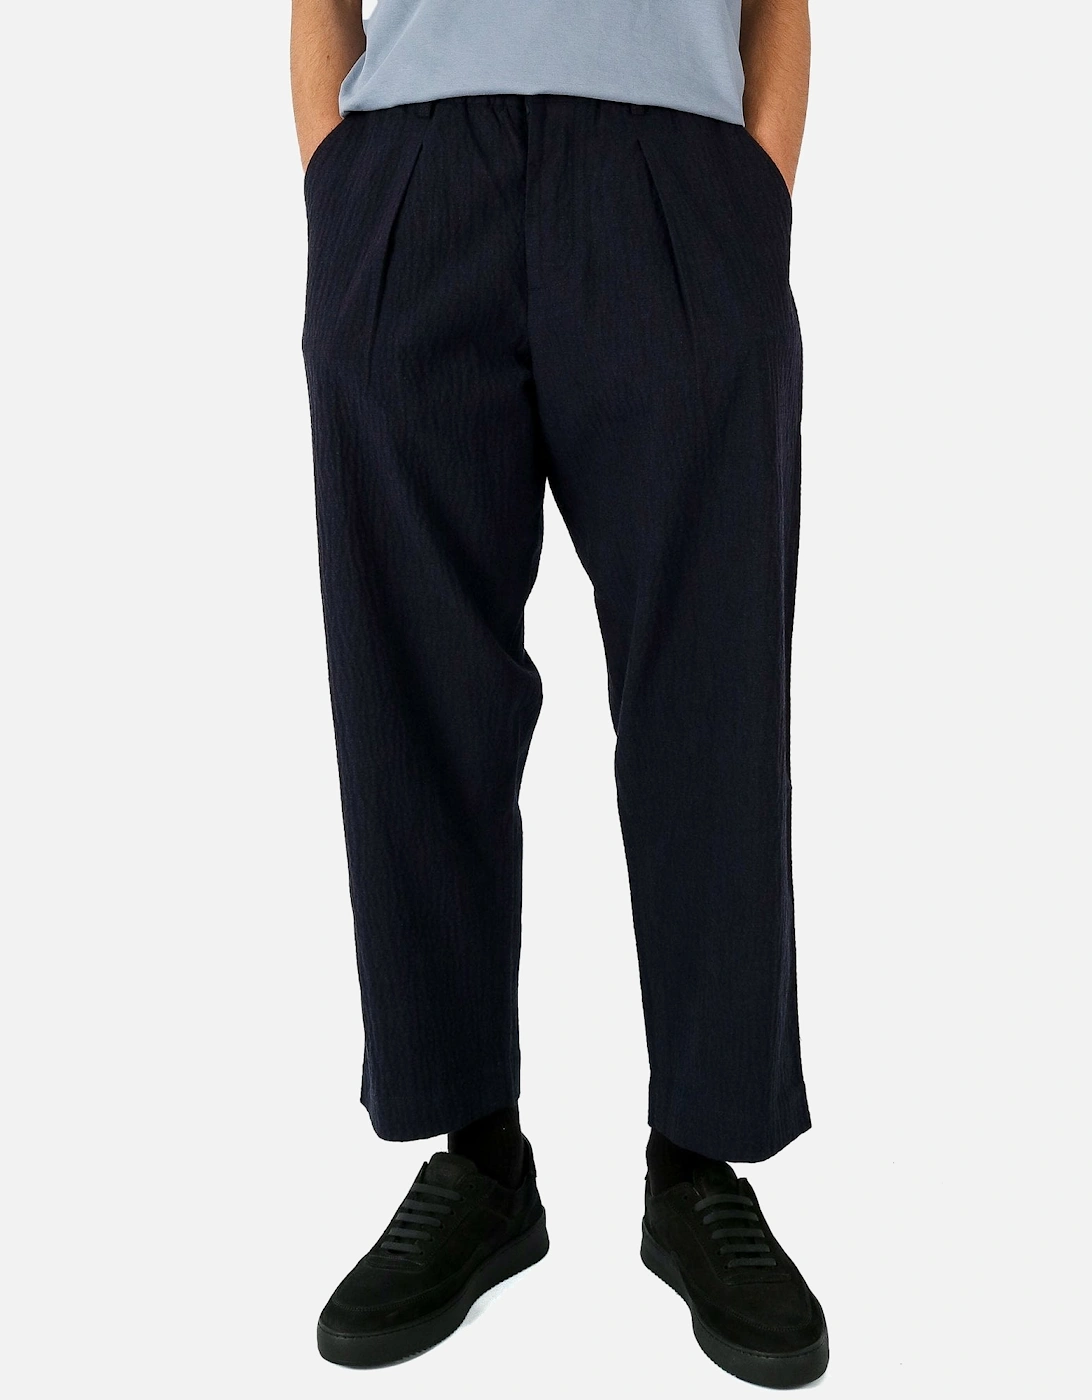 Oxford Pleated Ospina Cotton Navy Trouser